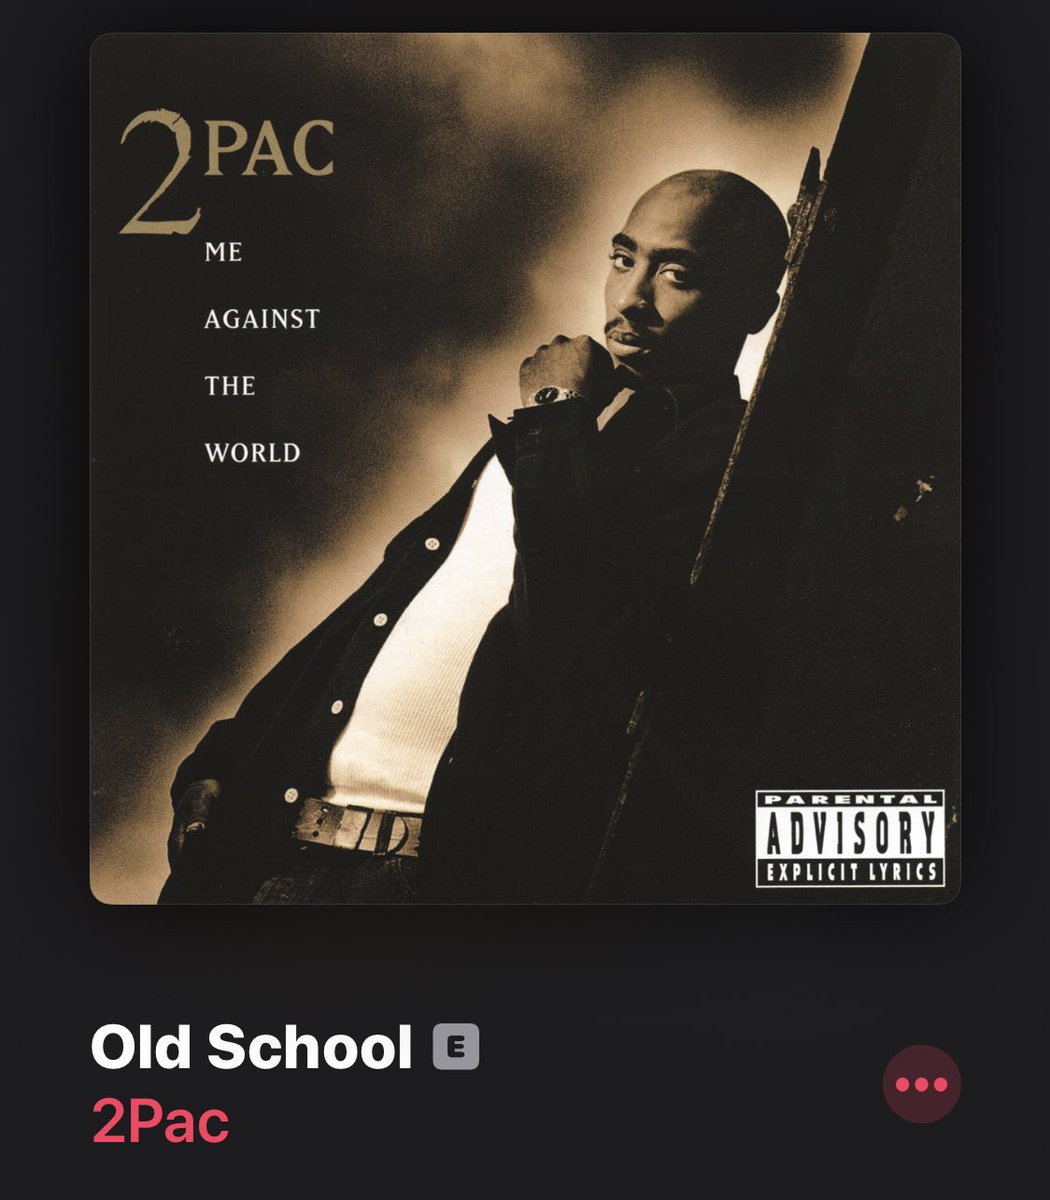 “What more could I say? I wouldn't be here todayIf the old school didn't pave the way"